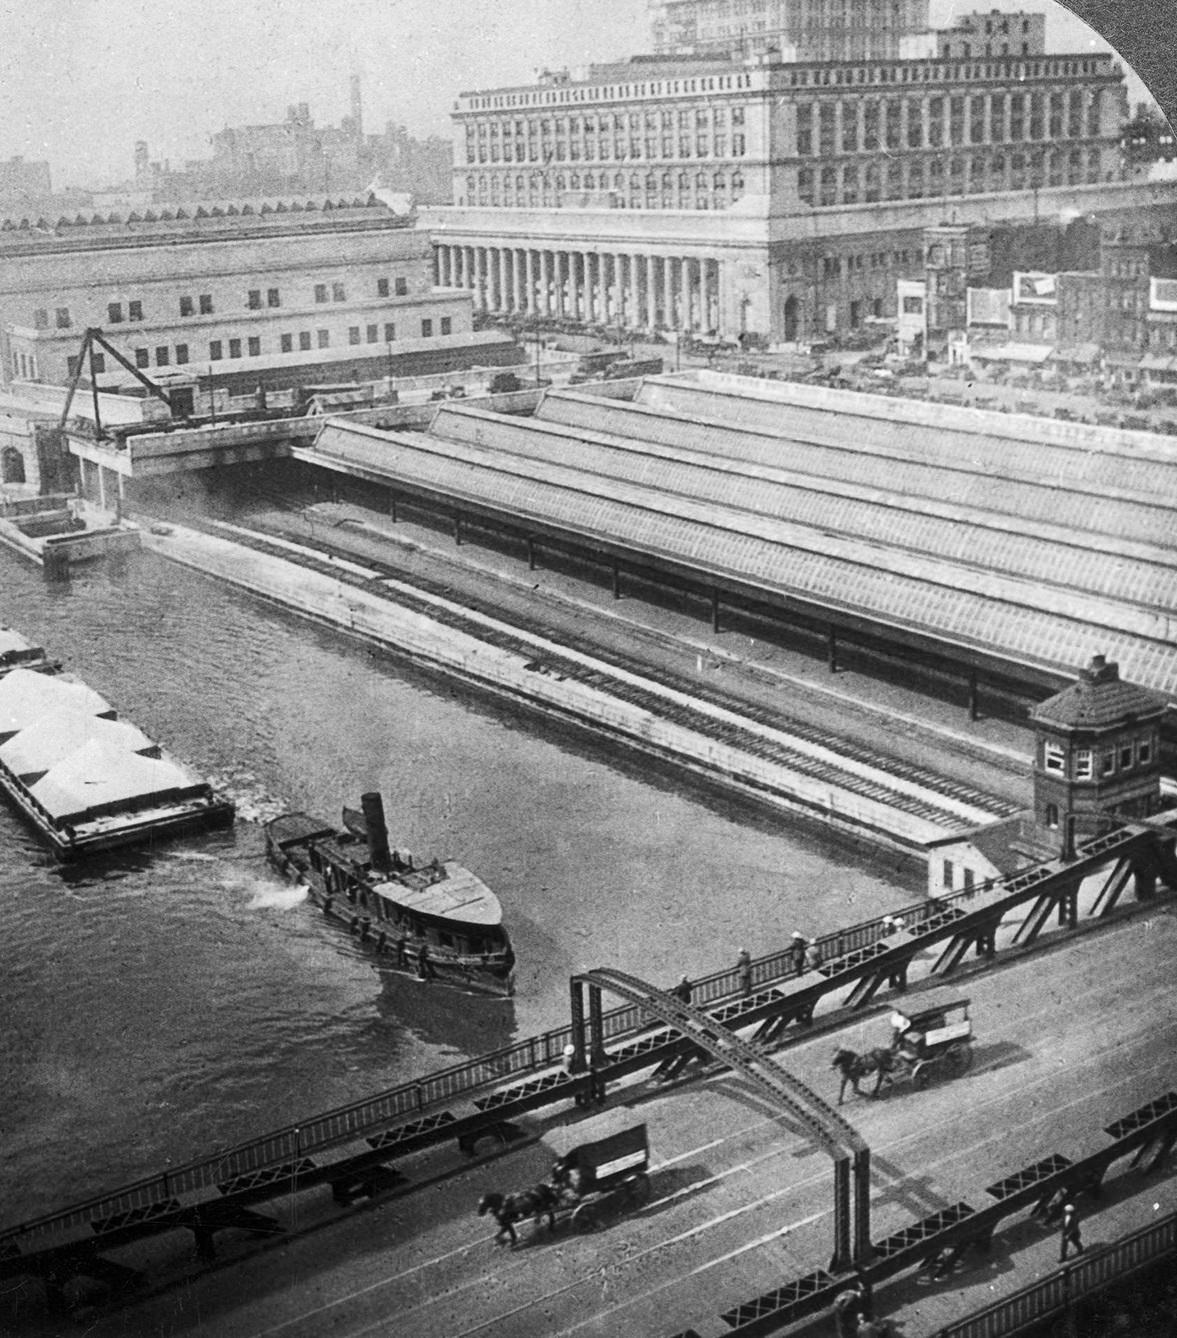 Union Station and The Chicago River, 1910s